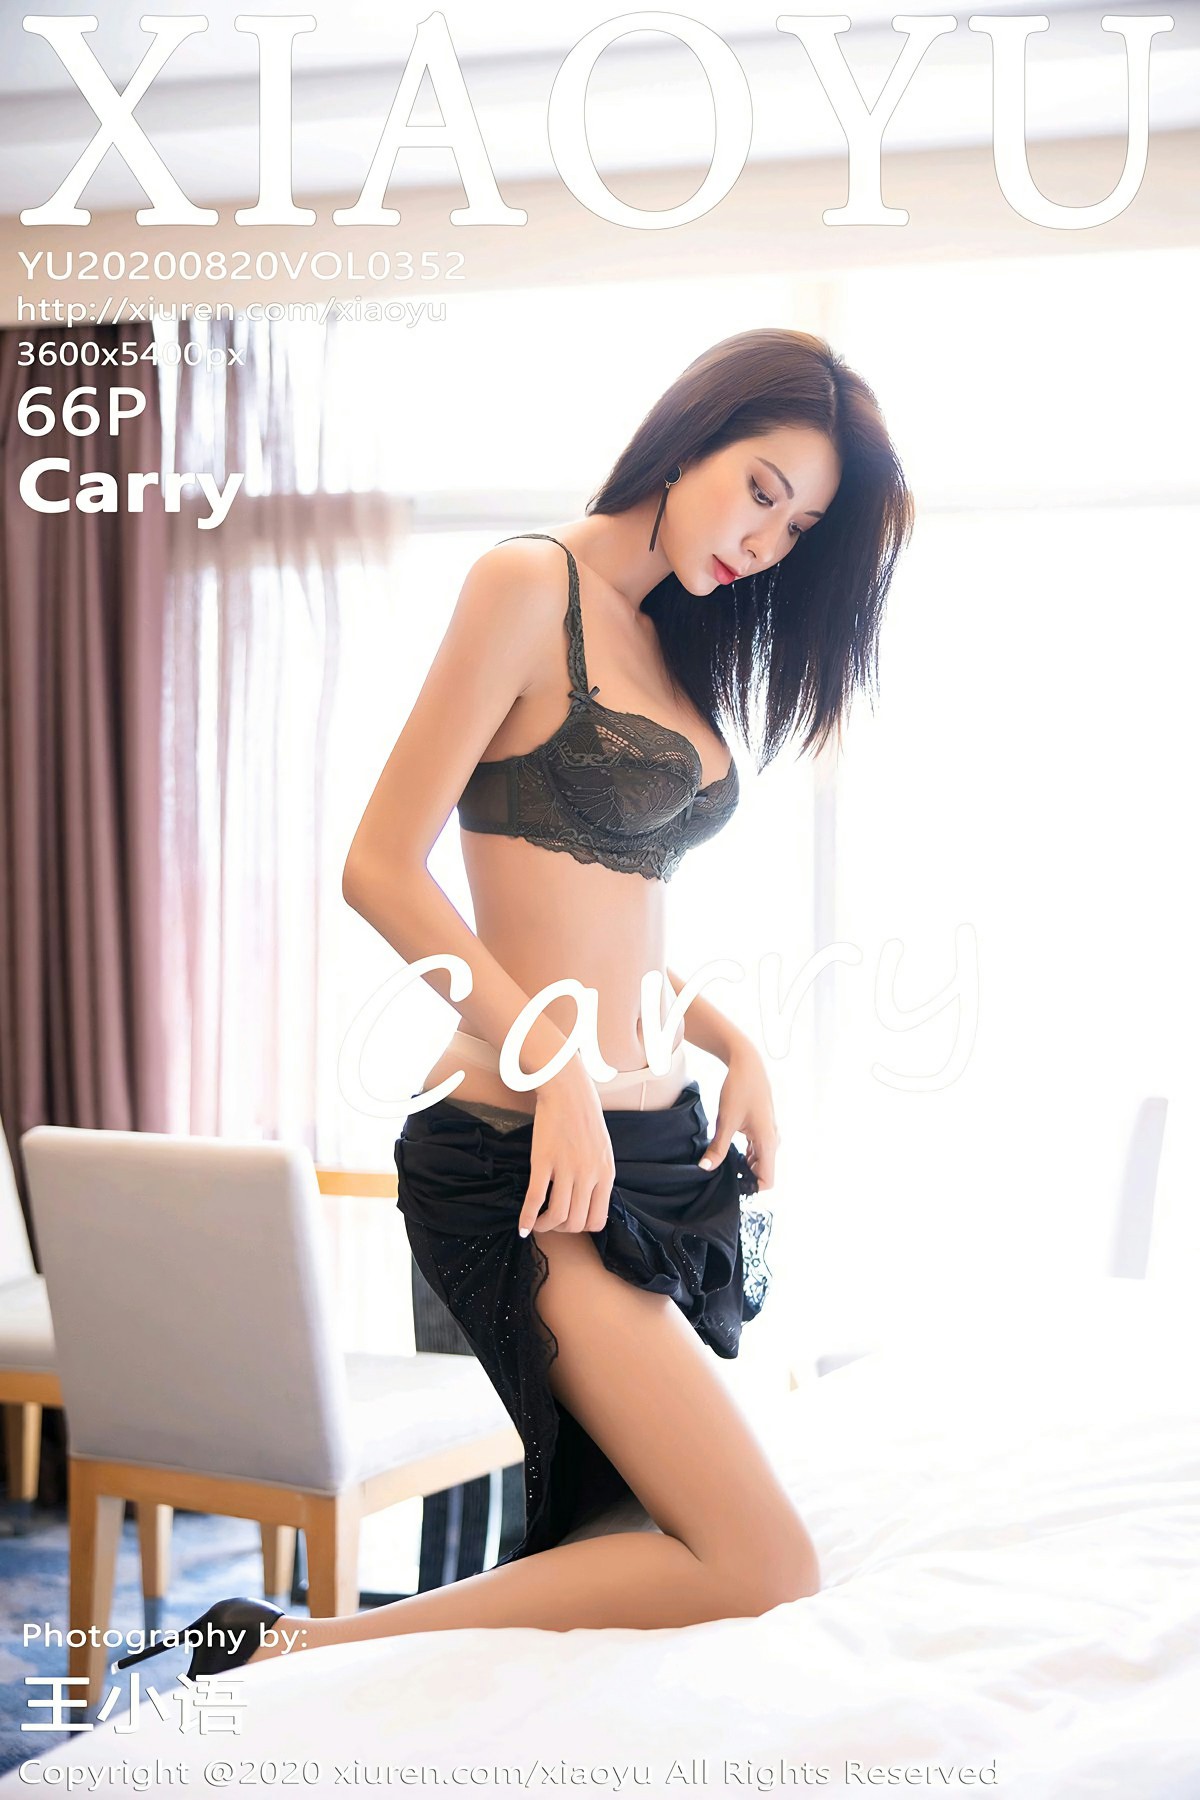 [XIAOYU语画界] 2020.08.20 VOL.352 <strong>carry</strong> [66+1P]